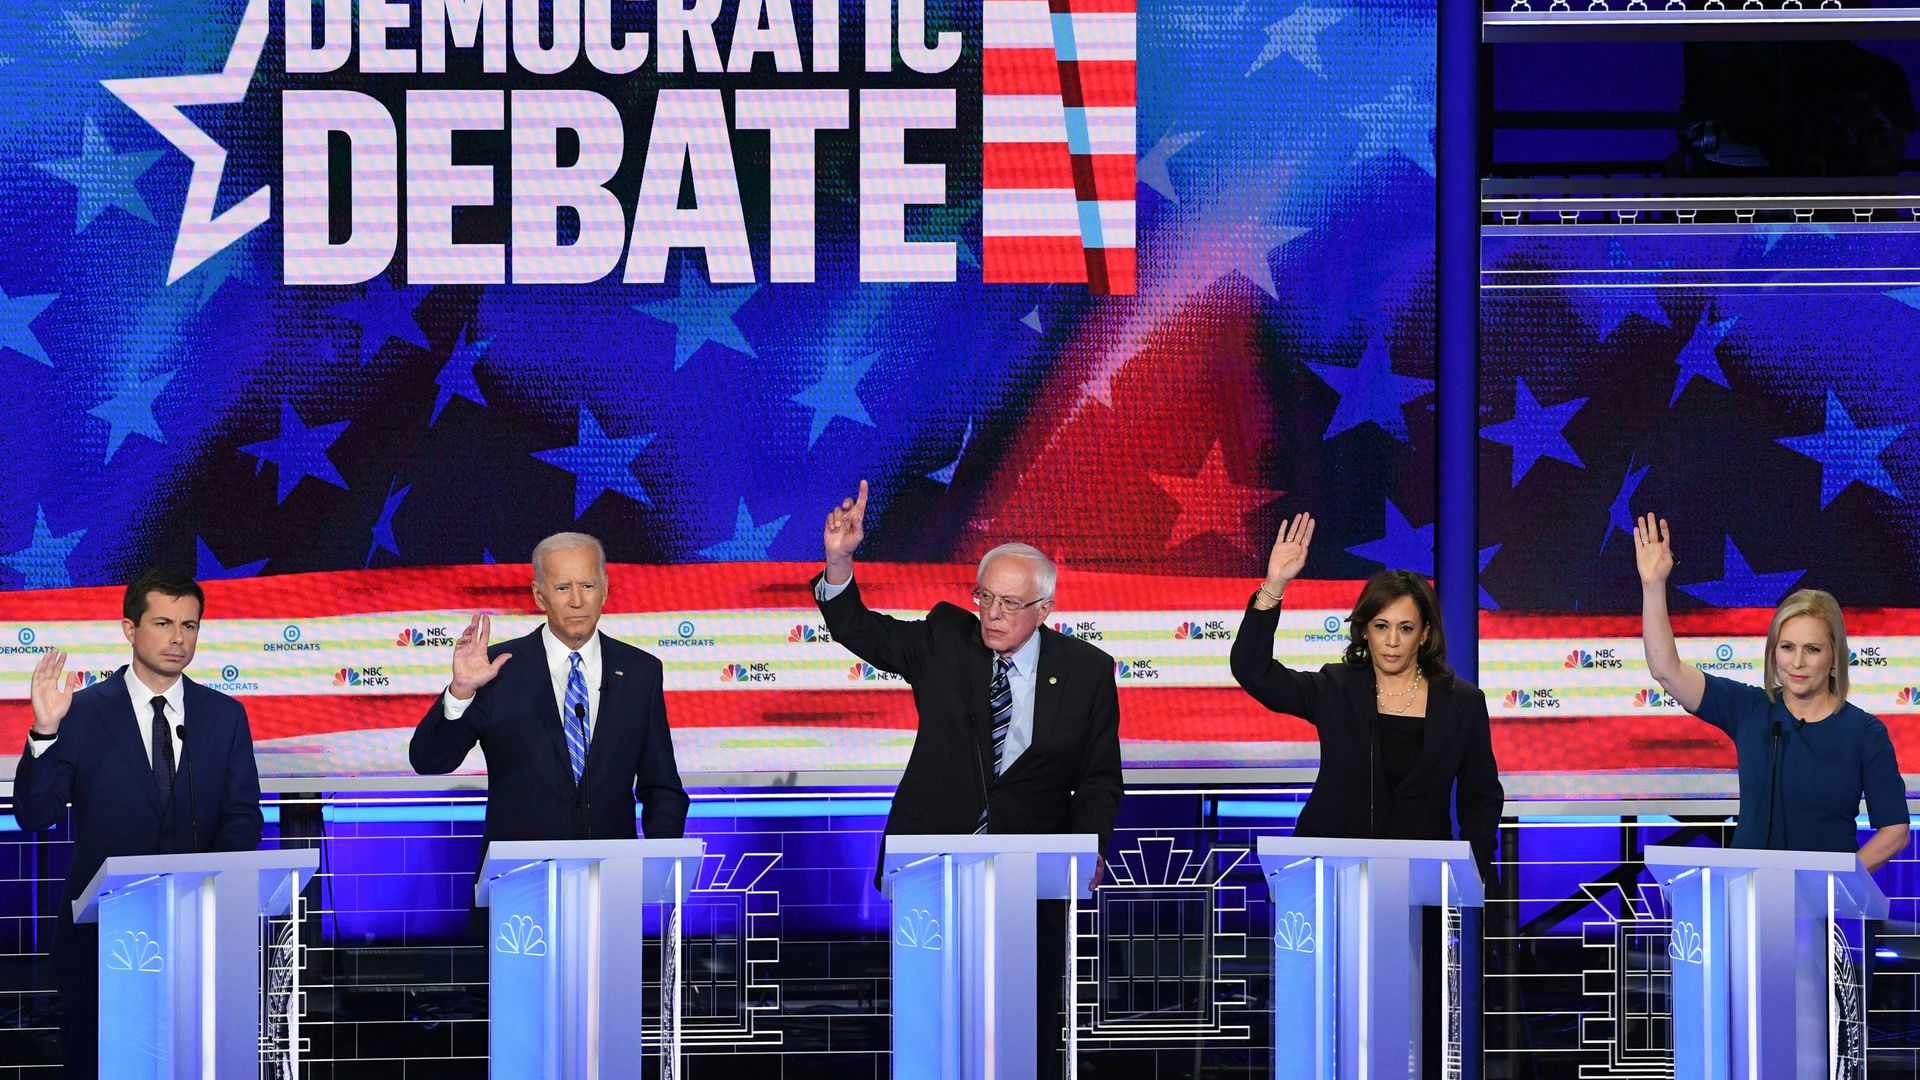 Democratic presidential candidates on the debate stage raise their hands